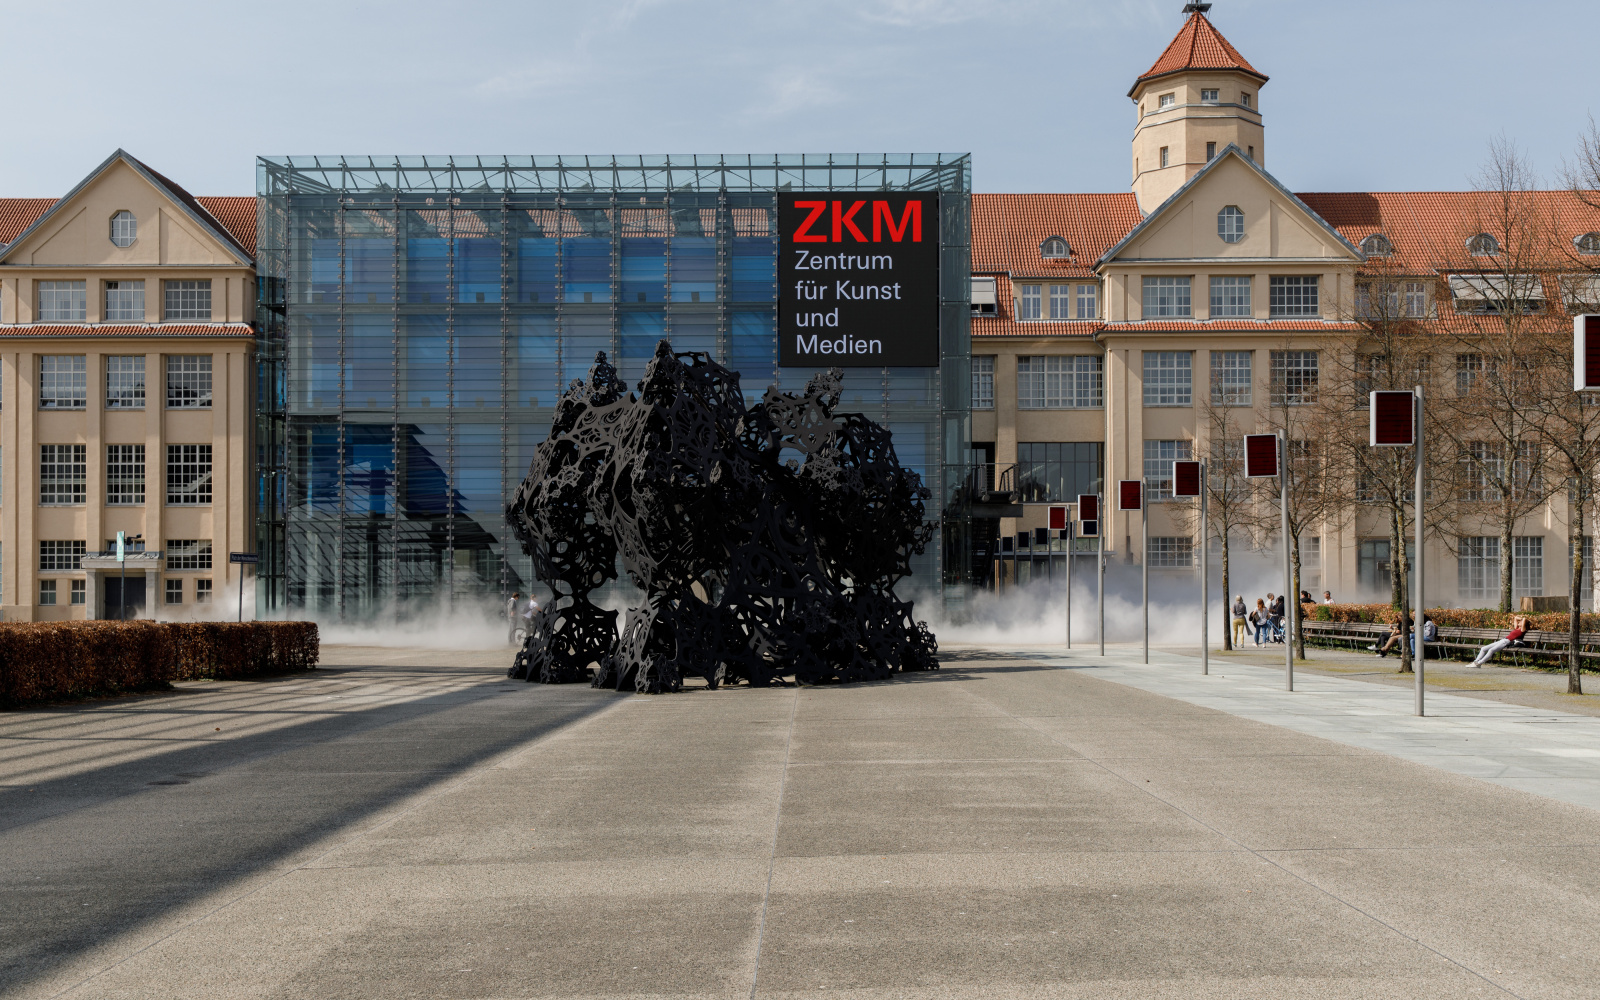 Fog rises around the cube of the ZKM, which influences the view of the ZKM.